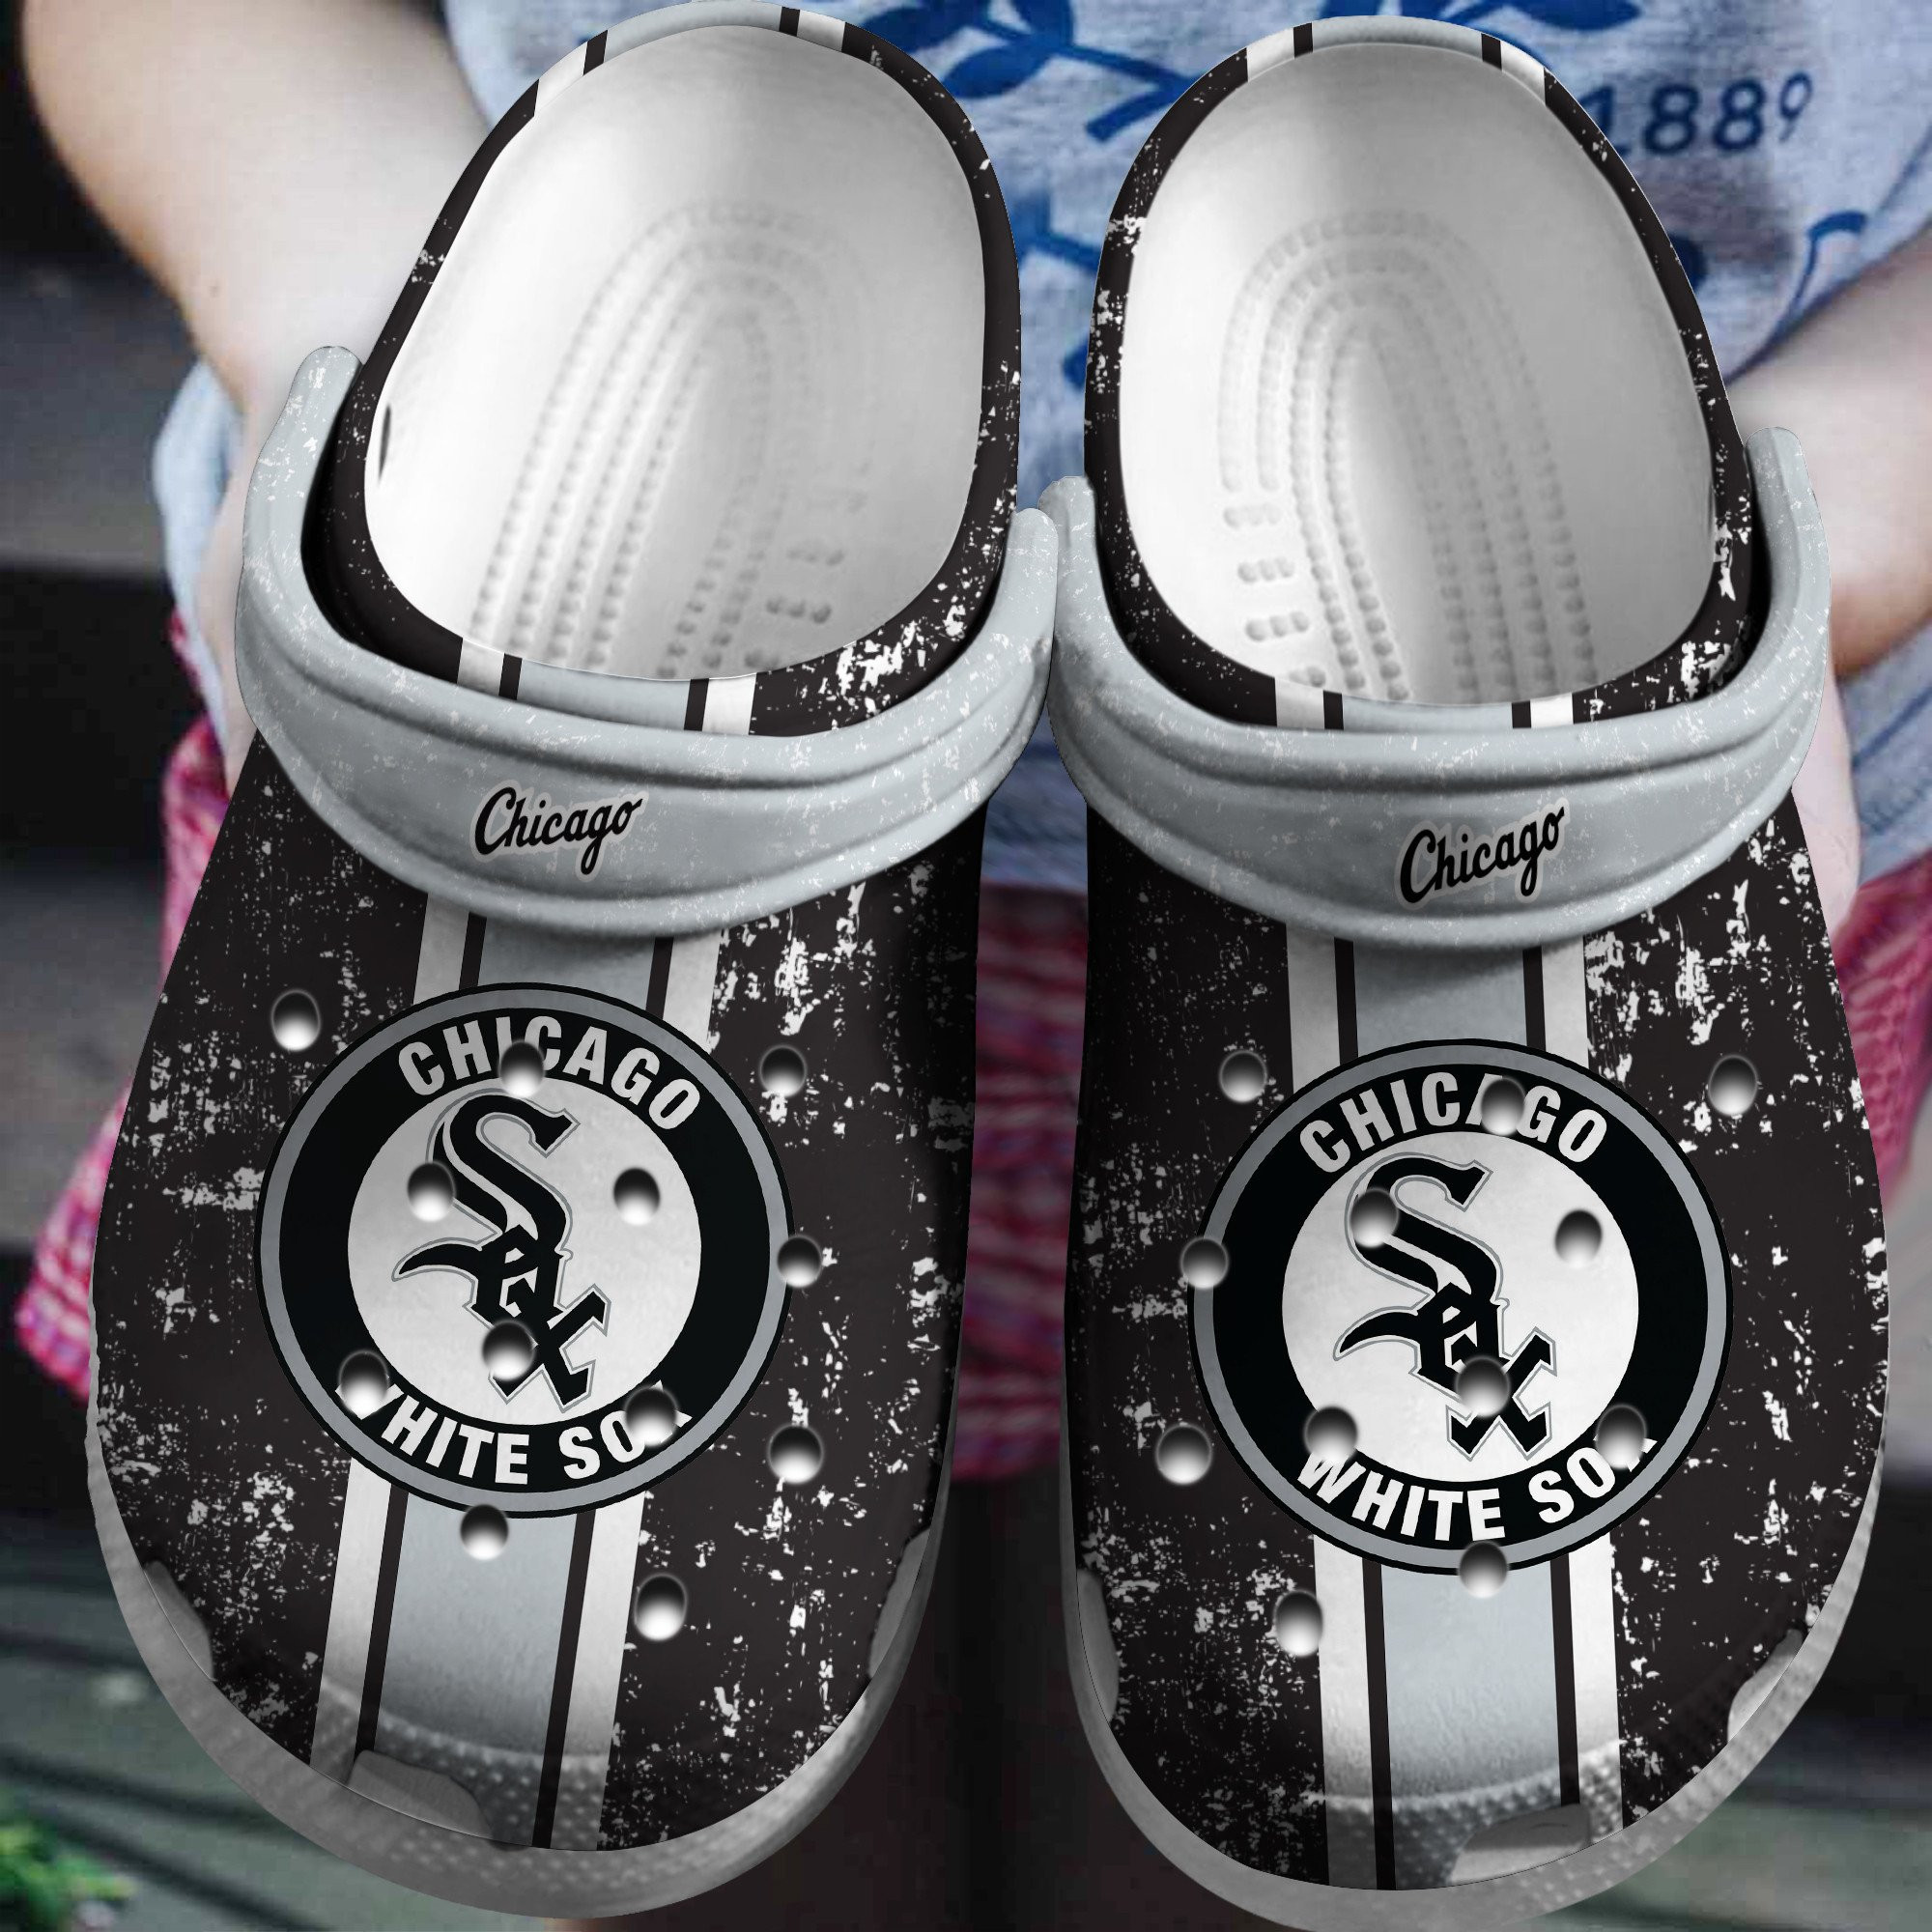 Hot Mlb Team Chicago White Sox Crocs Clog Shoesshoes Trusted Shopping Online In The World